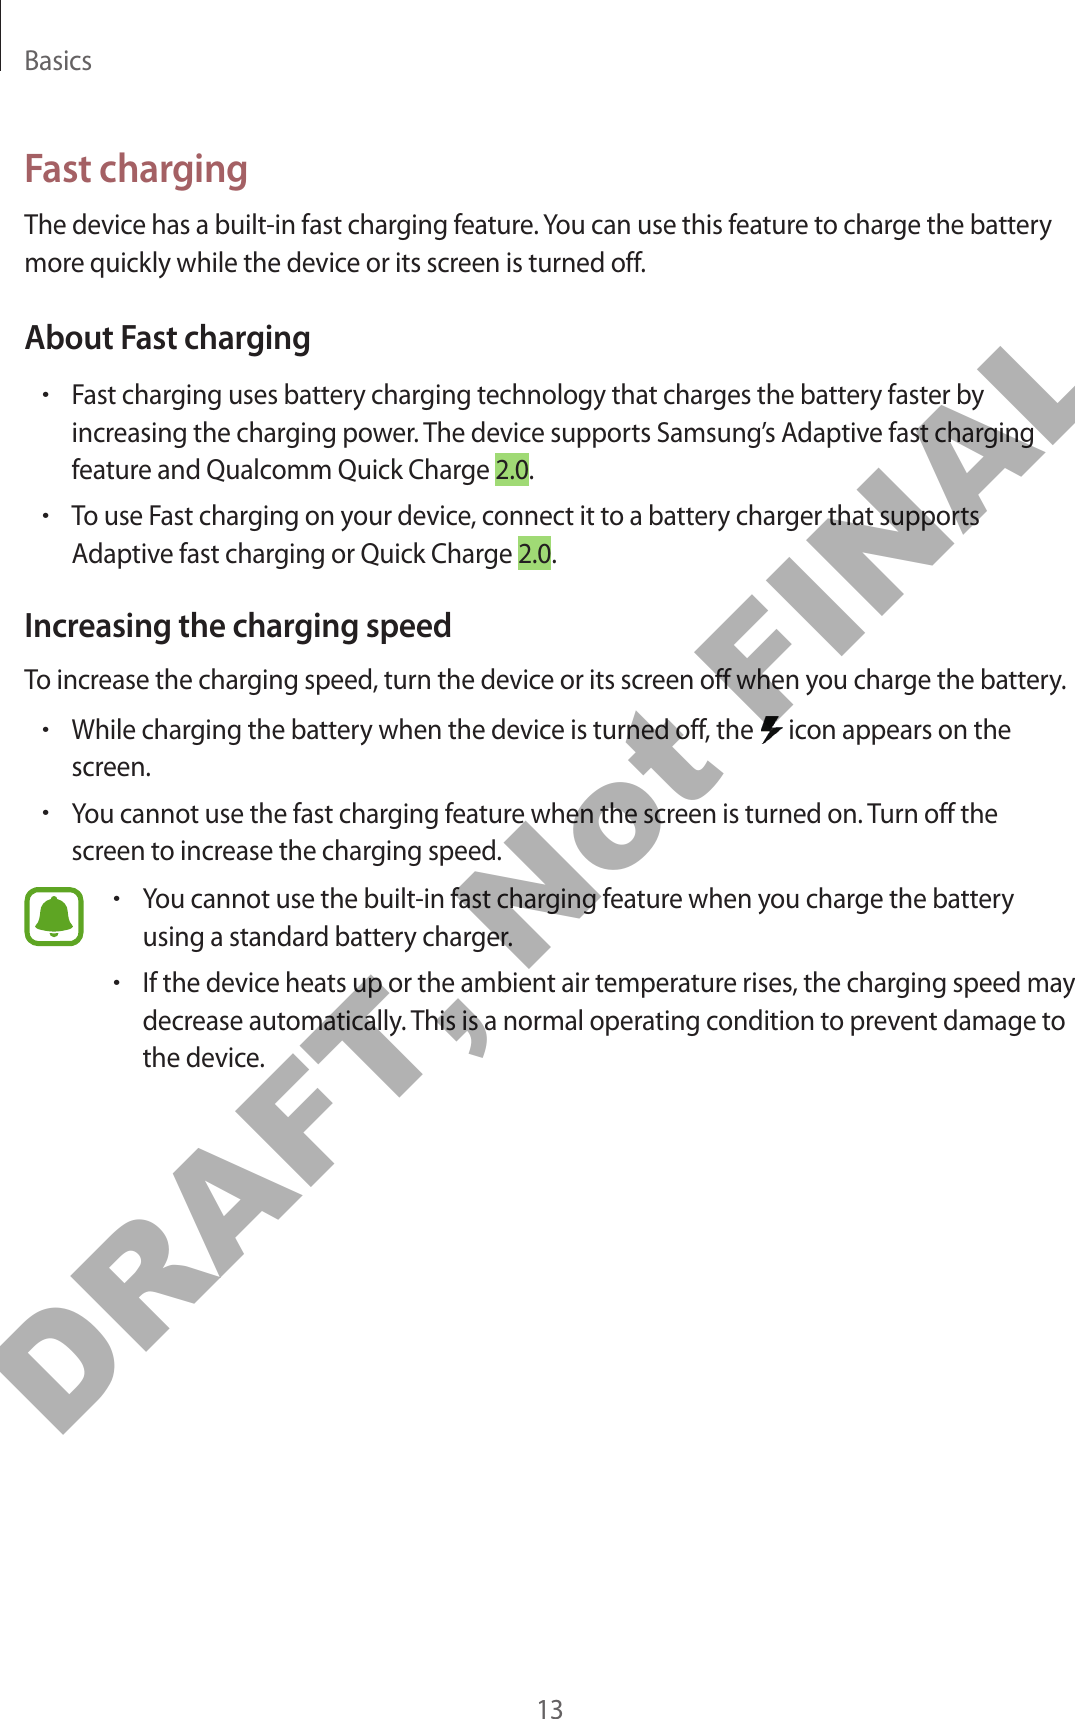 Basics13Fast chargingThe device has a built-in fast charging feature. You can use this feature to charge the battery more quickly while the device or its screen is turned off.About Fast charging•Fast charging uses battery charging technology that charges the battery faster by increasing the charging power. The device supports Samsung’s Adaptive fast charging feature and Qualcomm Quick Charge 2.0.•To use Fast charging on your device, connect it to a battery charger that supports Adaptive fast charging or Quick Charge 2.0.Increasing the charging speedTo increase the charging speed, turn the device or its screen off when you charge the battery.•While charging the battery when the device is turned off, the   icon appears on the screen.•You cannot use the fast charging feature when the screen is turned on. Turn off the screen to increase the charging speed.•You cannot use the built-in fast charging feature when you charge the battery using a standard battery charger.•If the device heats up or the ambient air temperature rises, the charging speed may decrease automatically. This is a normal operating condition to prevent damage to the device.DRAFT, Not FINAL